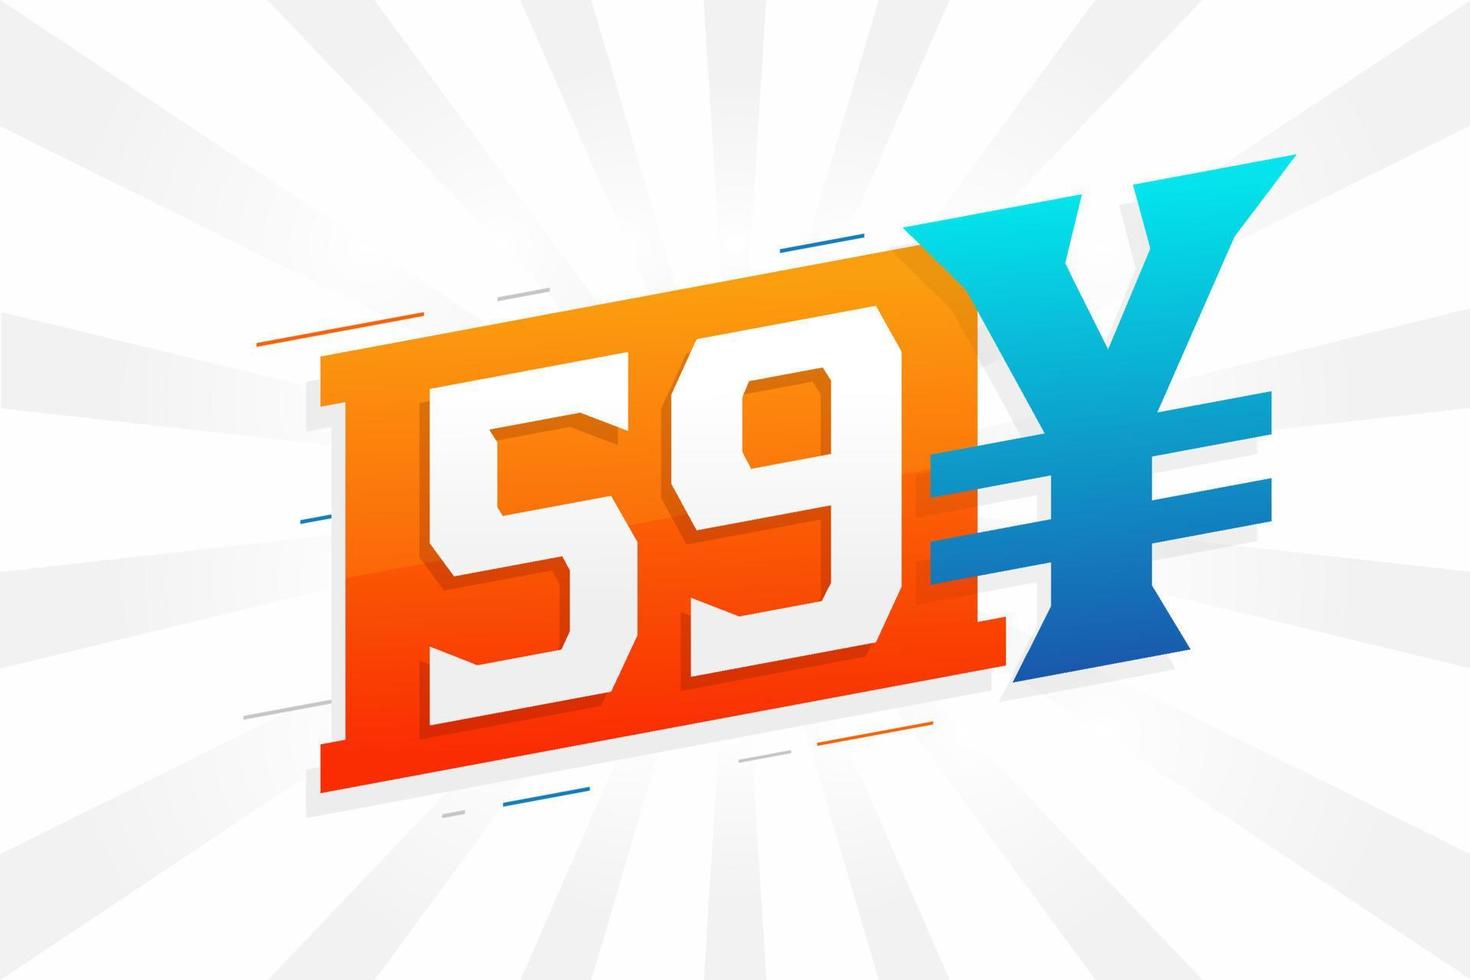 59 Yuan Chinese currency vector text symbol. 59 Yen Japanese currency Money stock vector